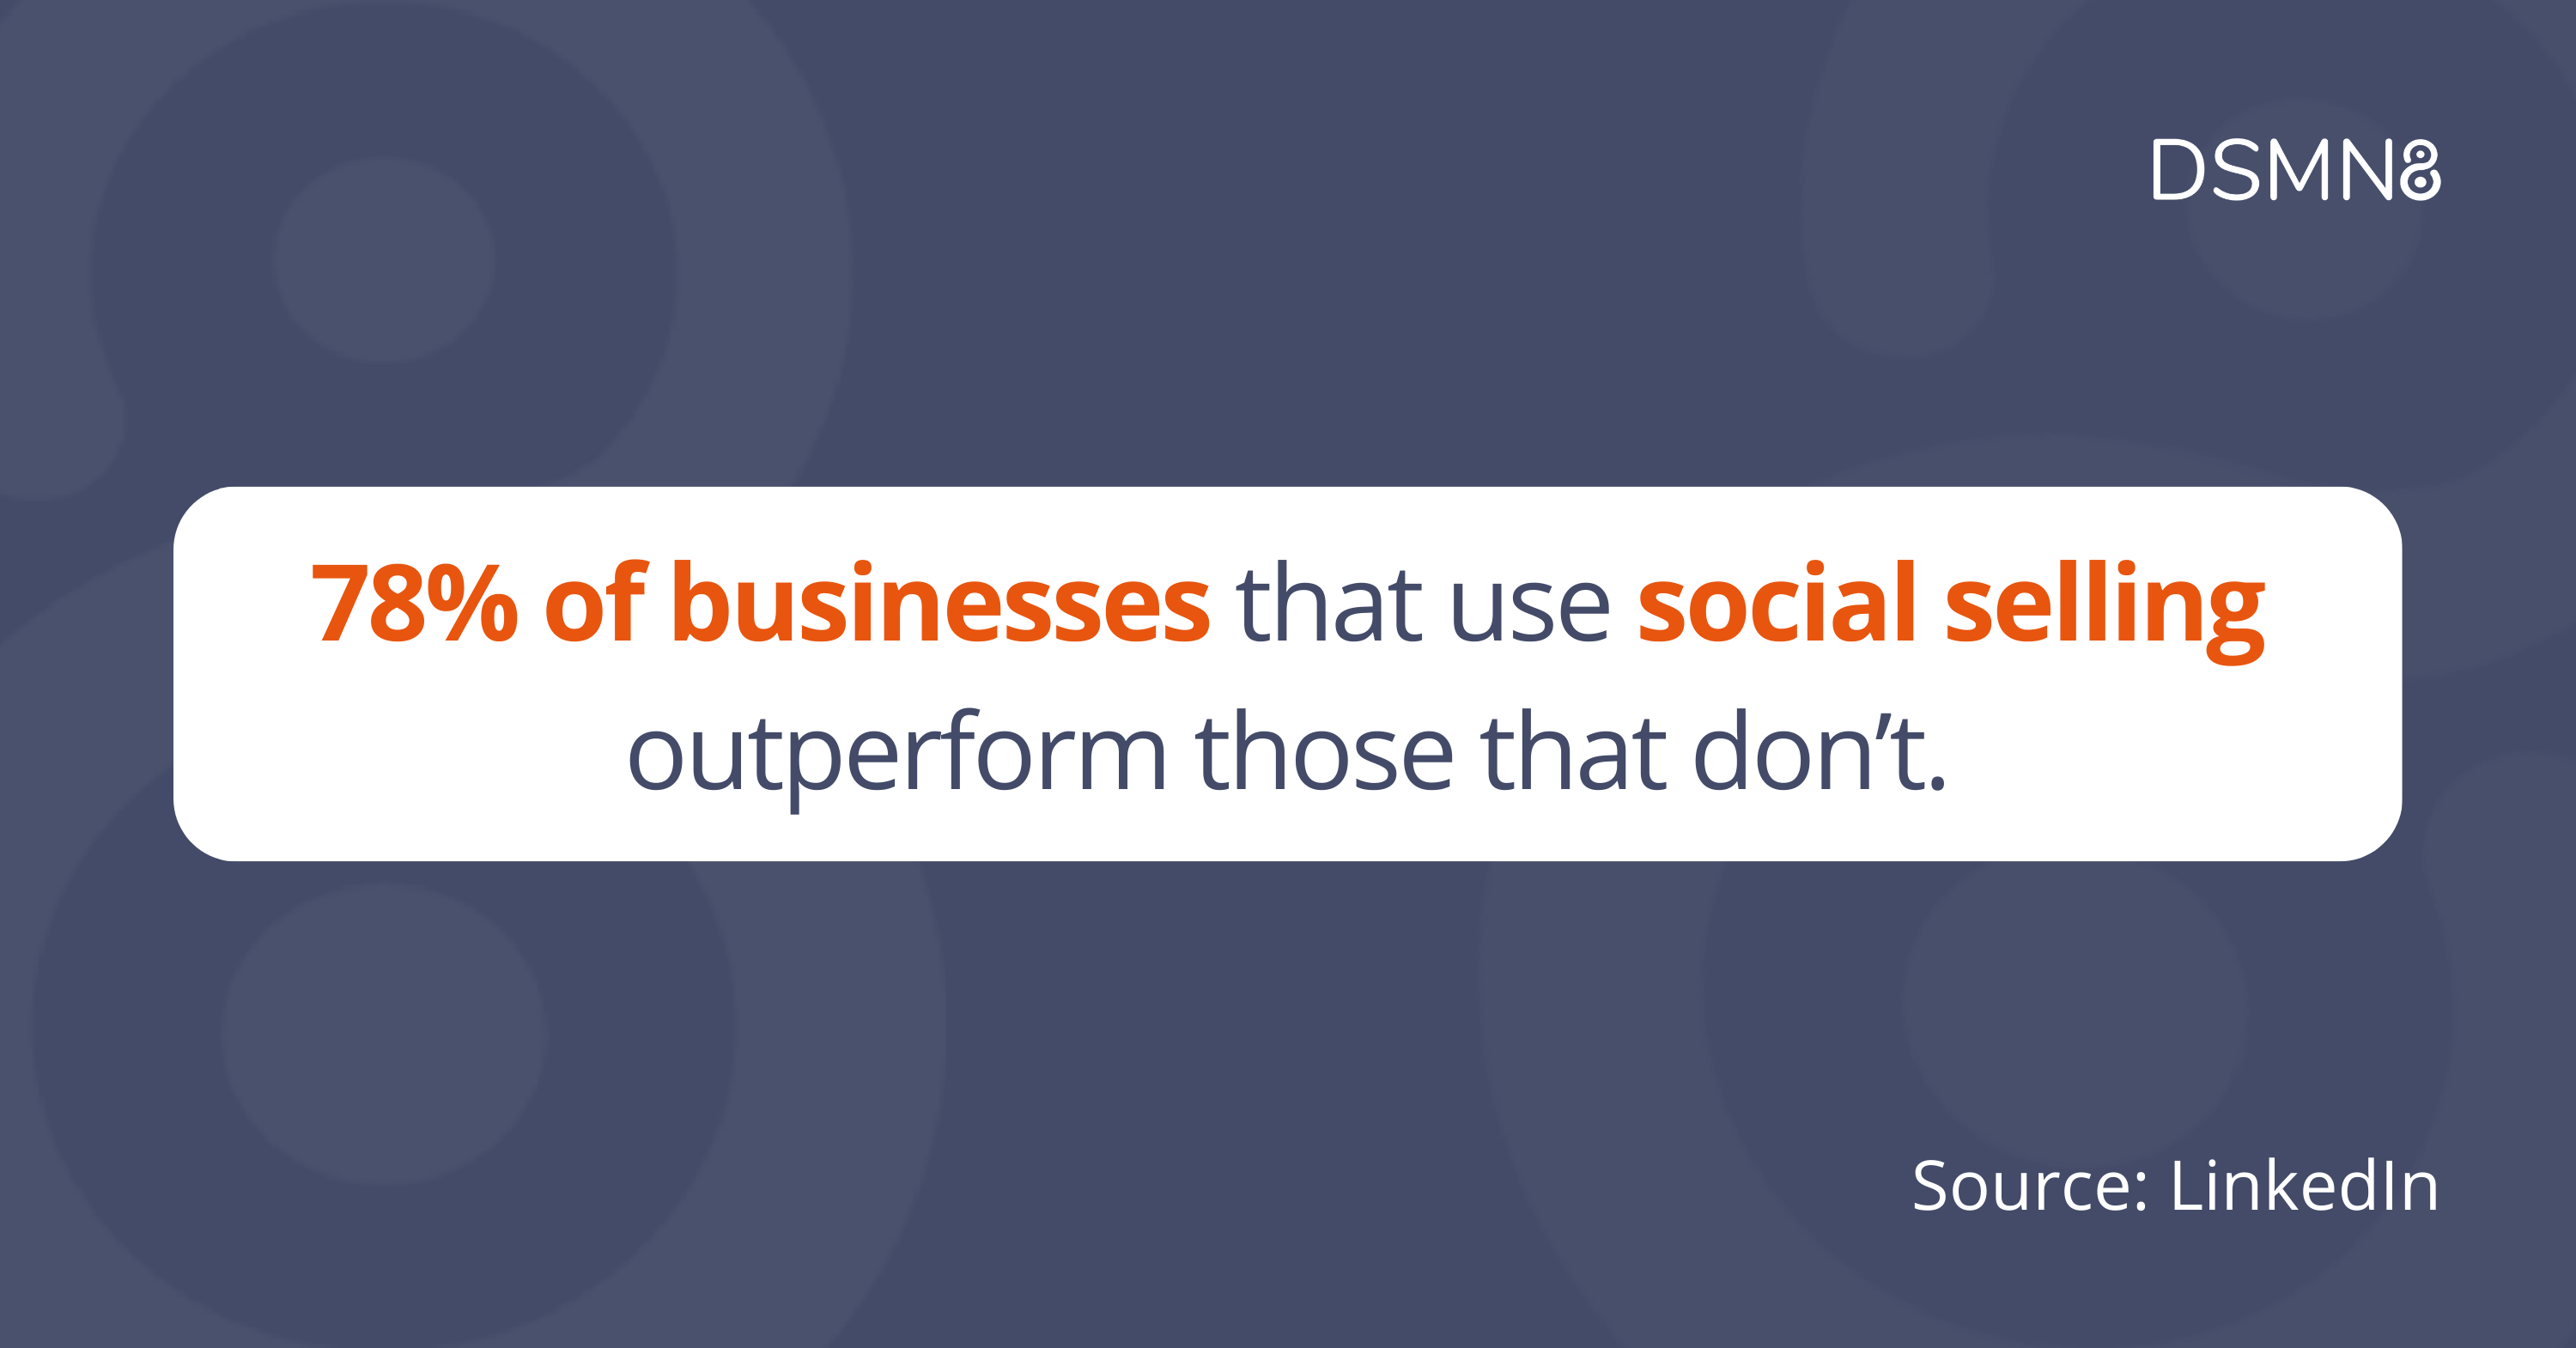 78% of businesses that use social selling outperform those that don't.